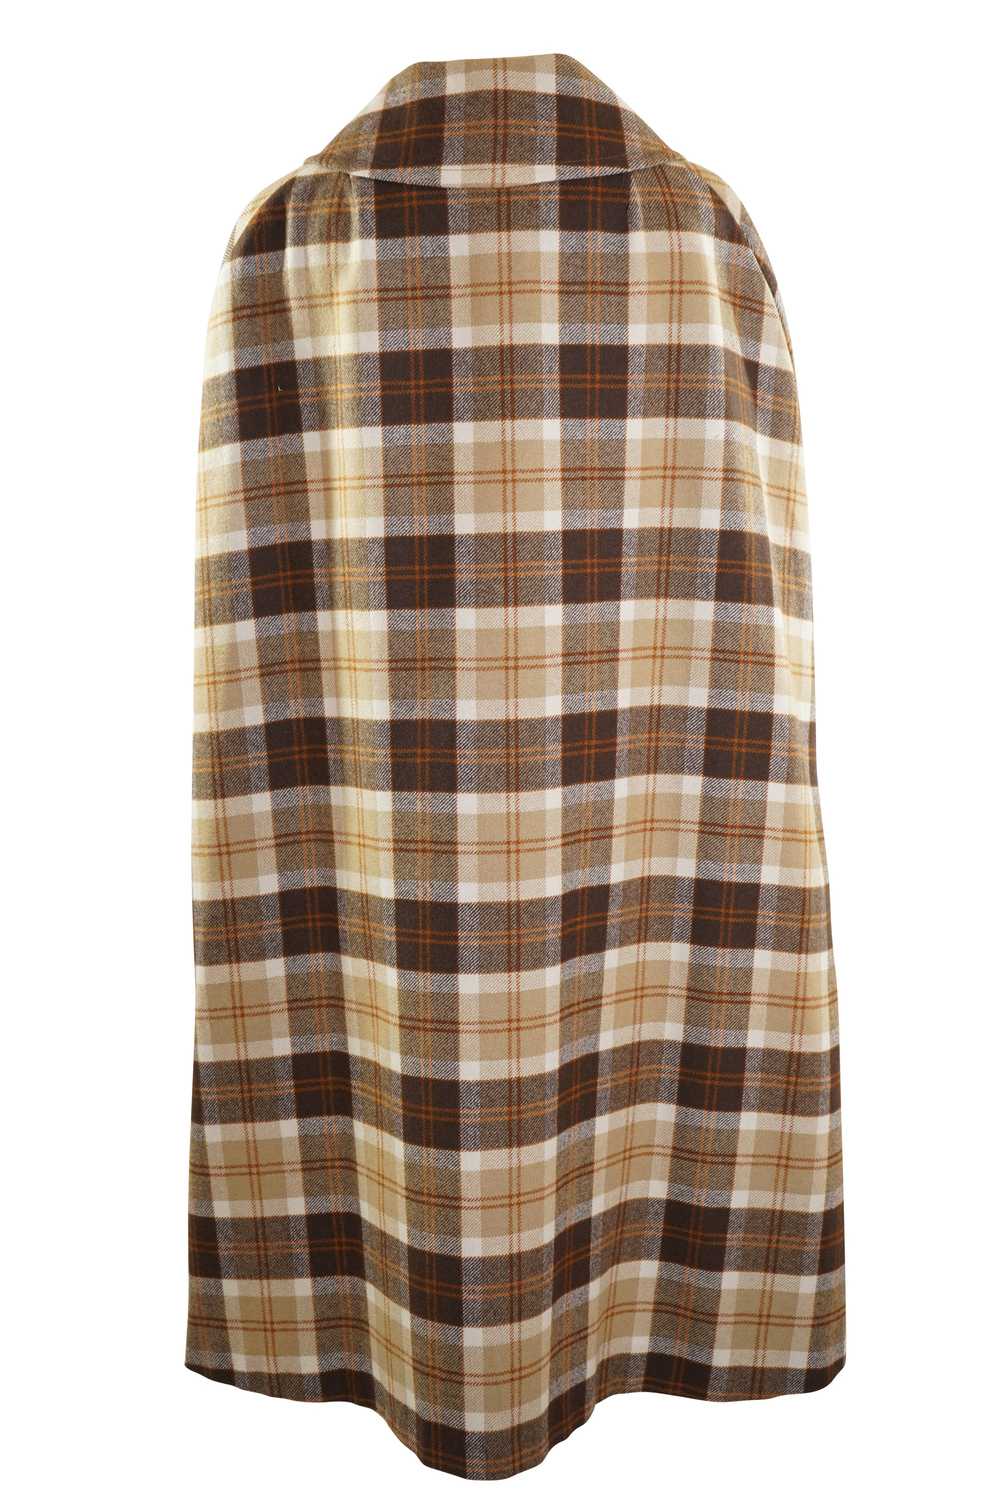 1970's Brown Wool Plaid Cape - image 2